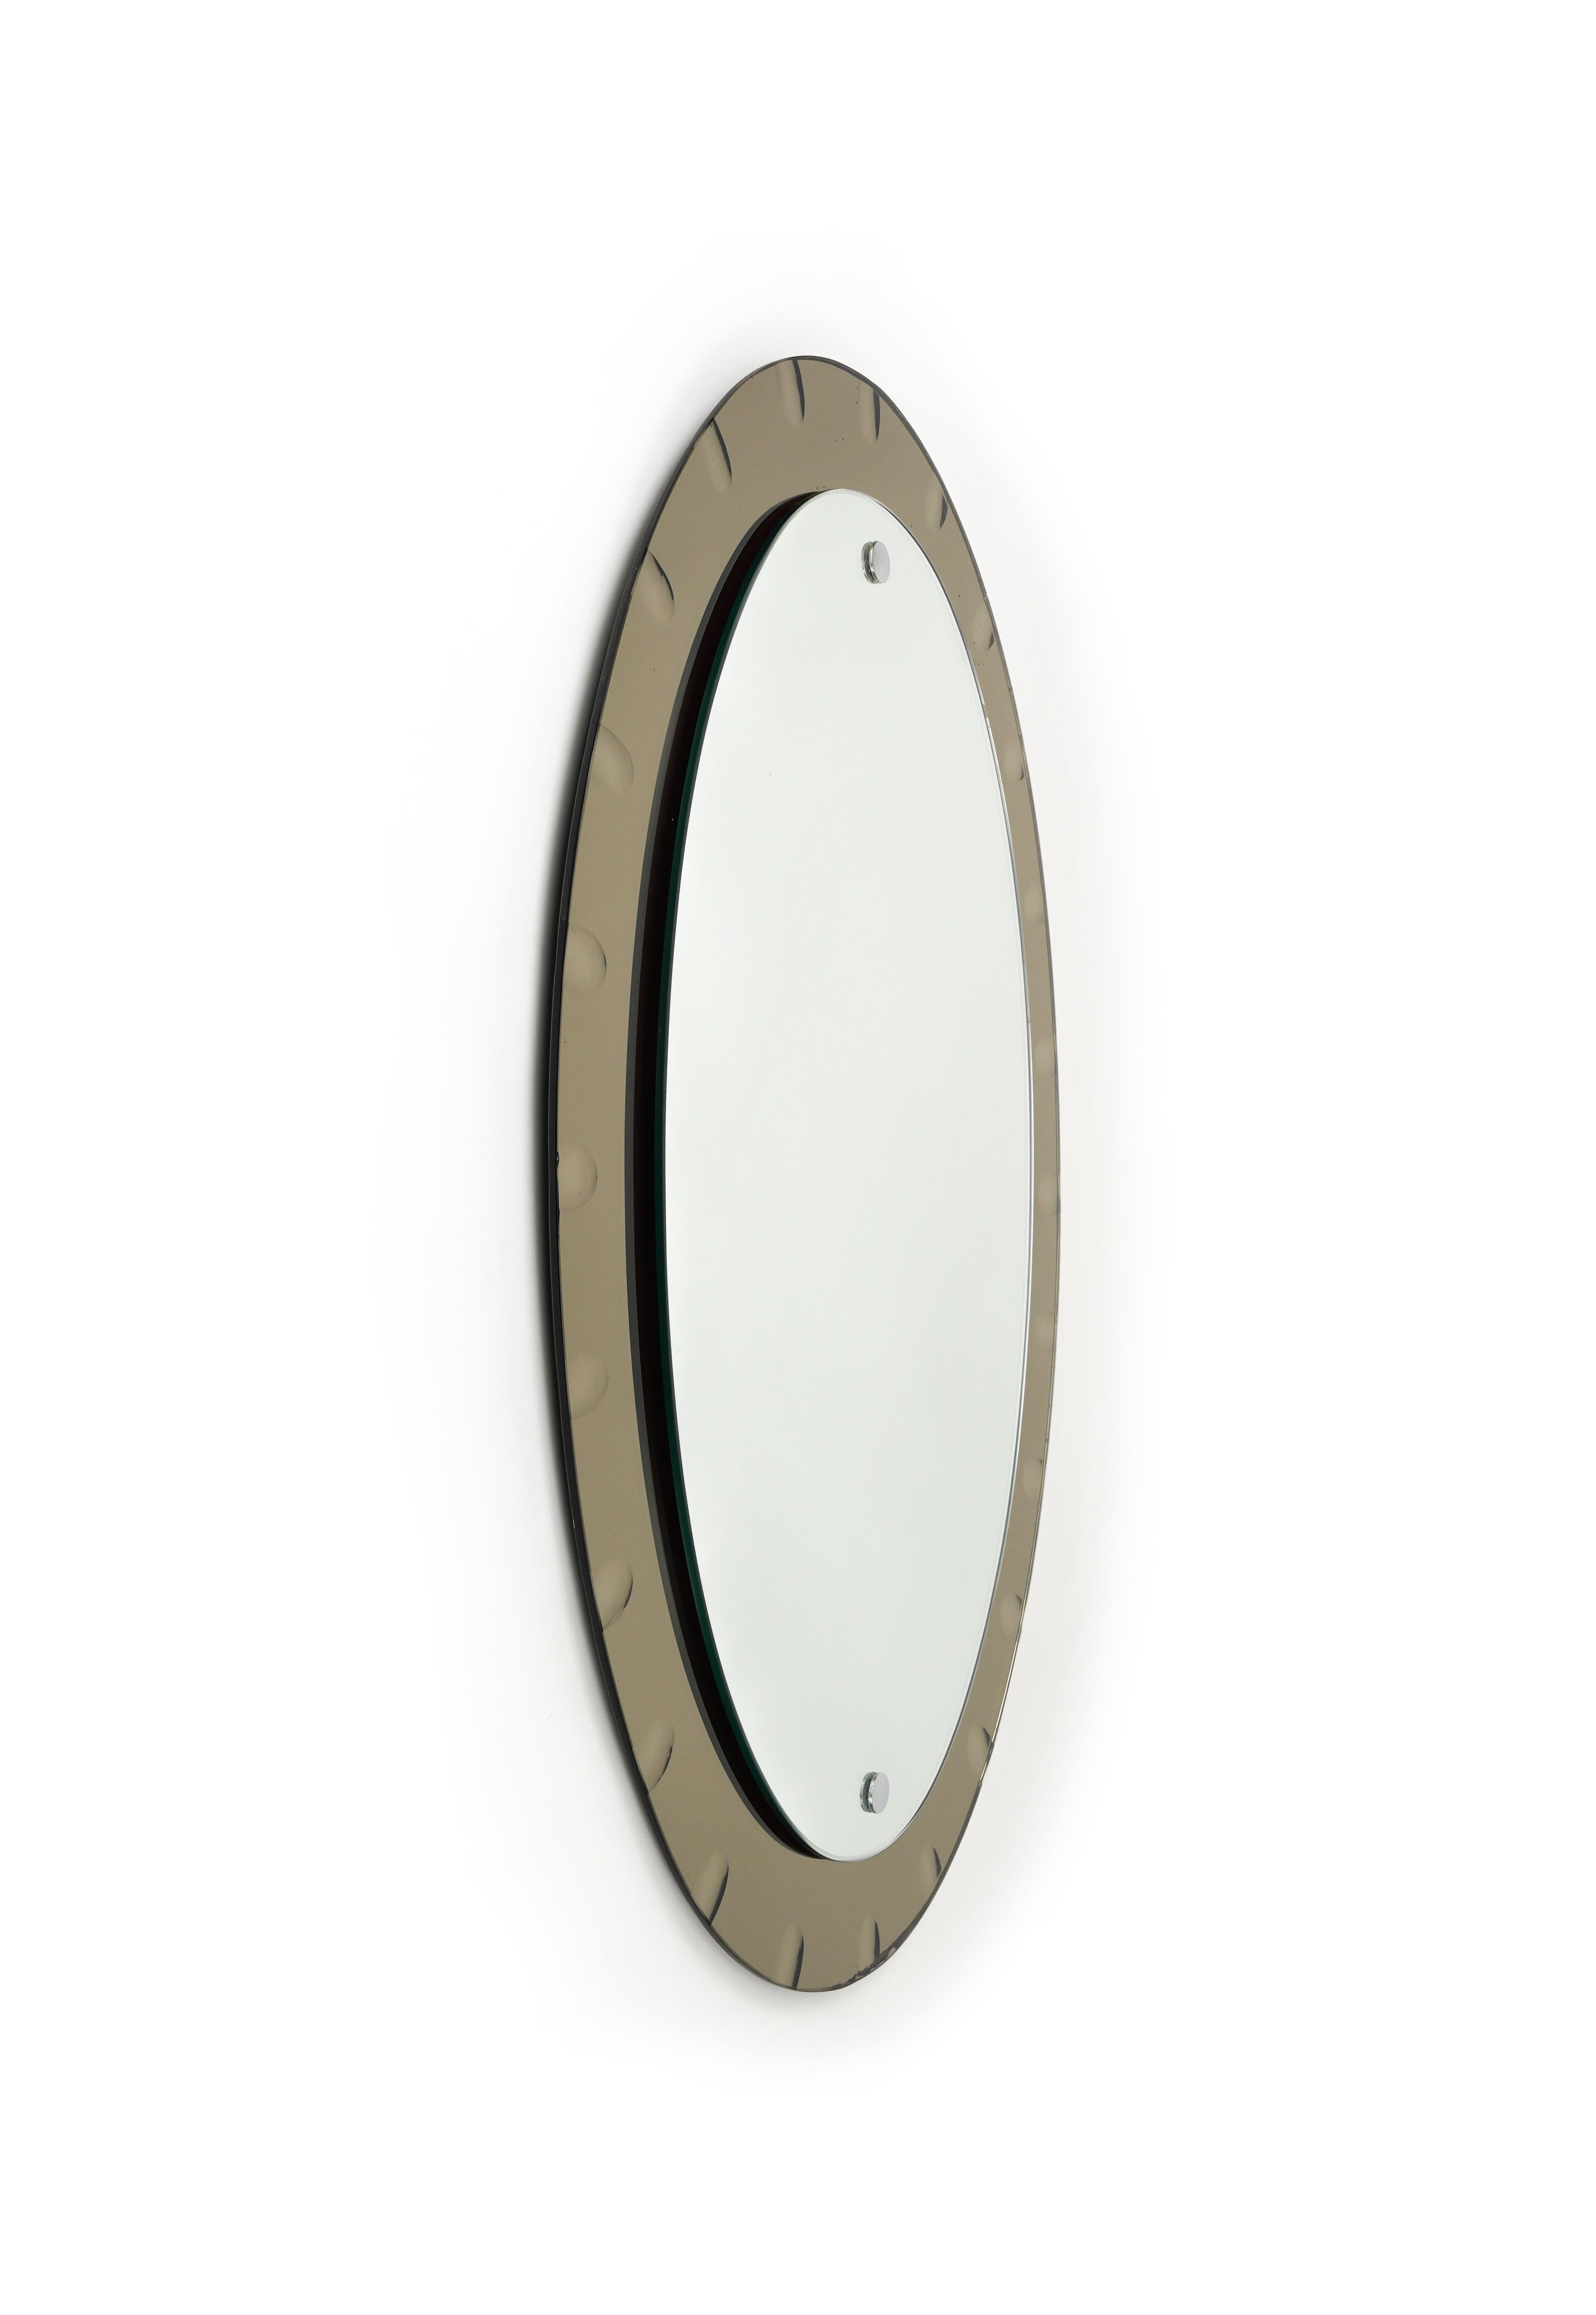 Mid-Century Modern Midcentury Oval Wall Mirror with Bronzed Frame by Cristal Arte, Italy 1960s For Sale